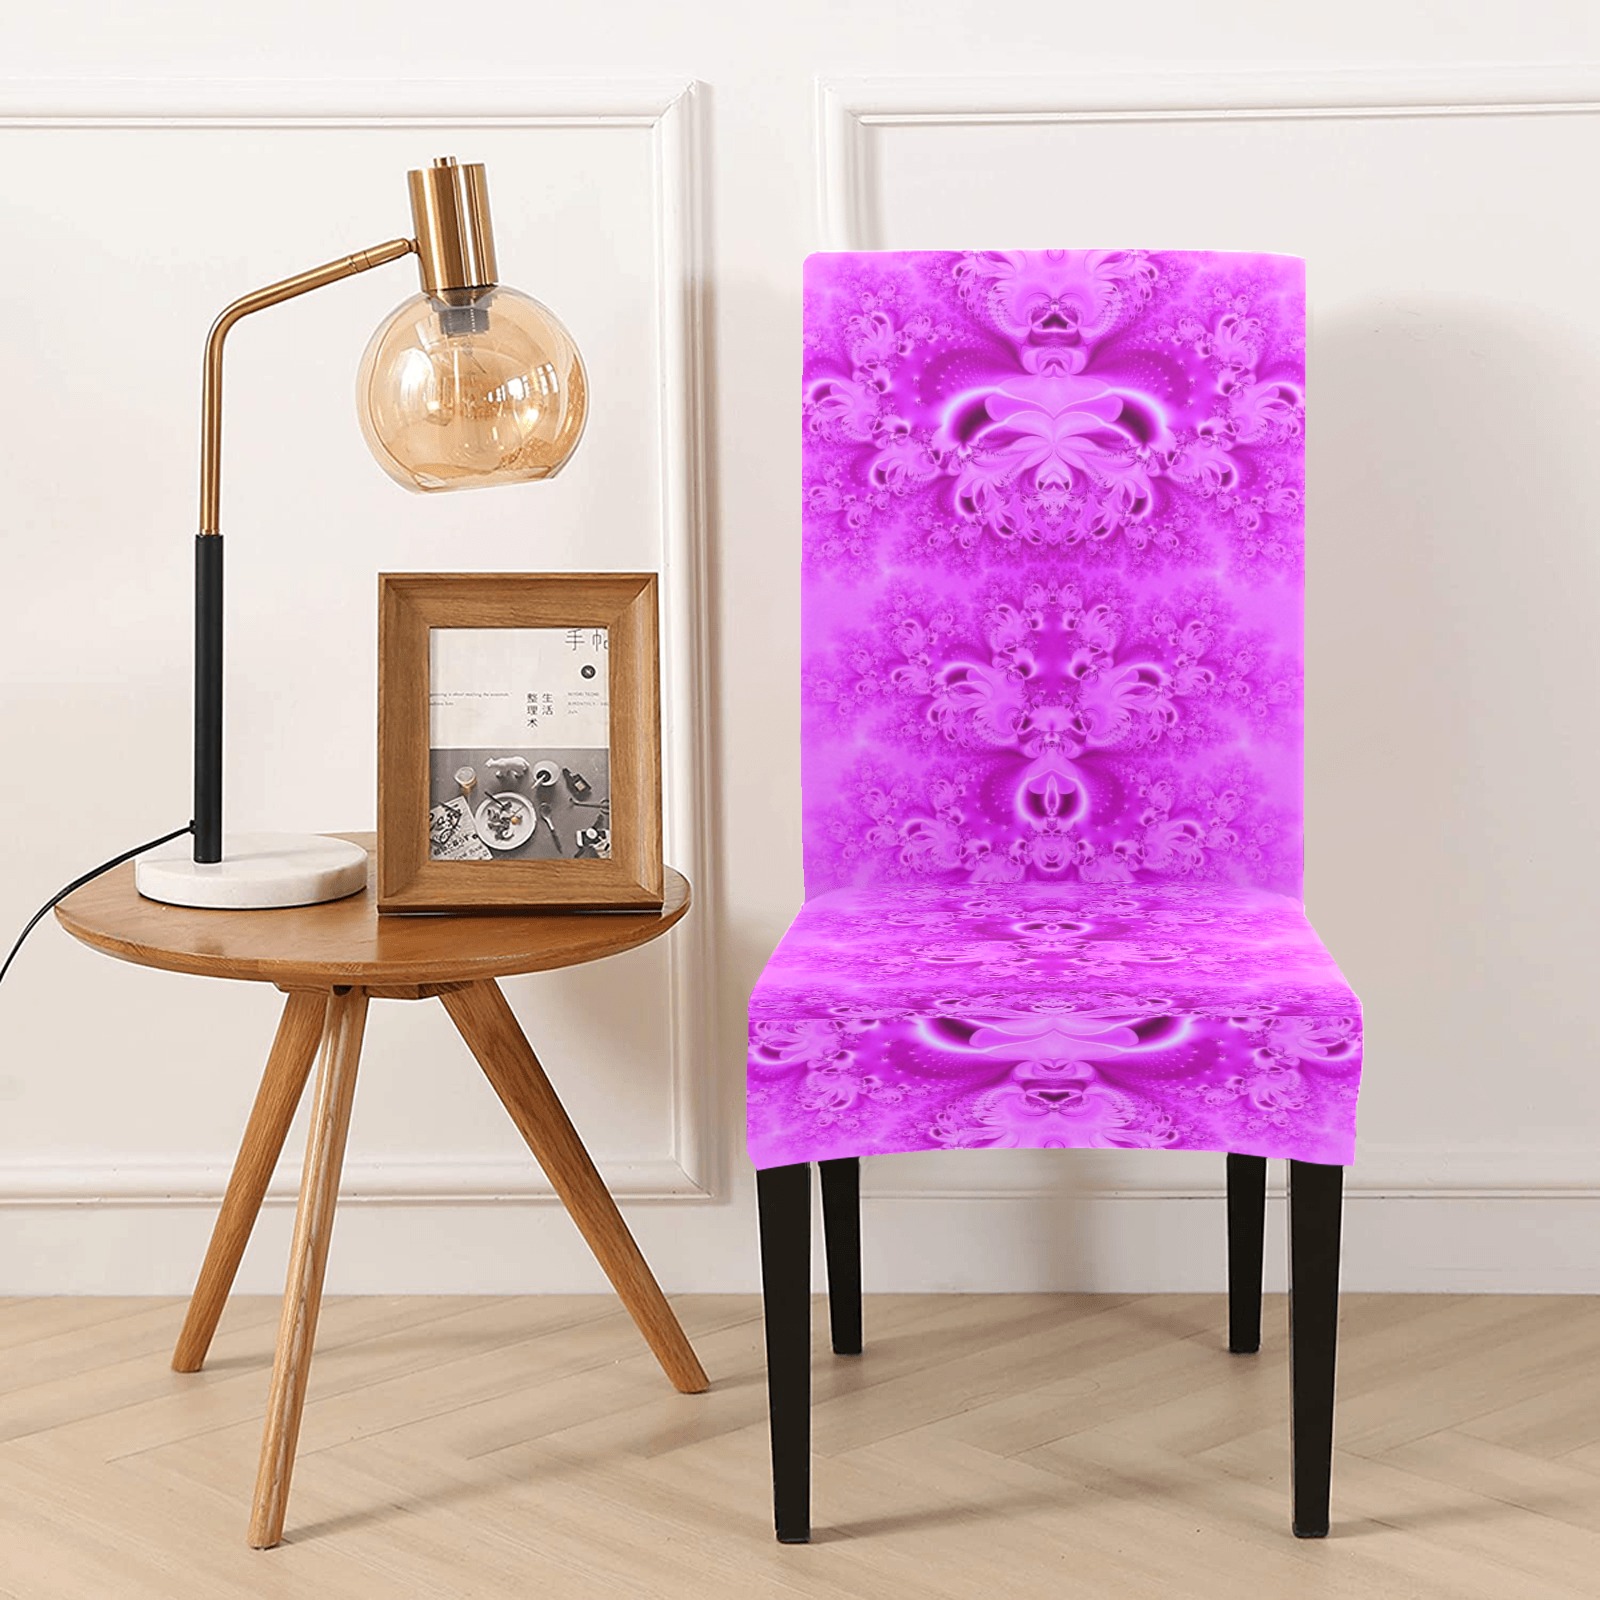 Soft Violet Flowers Frost Fractal Chair Cover (Pack of 4)